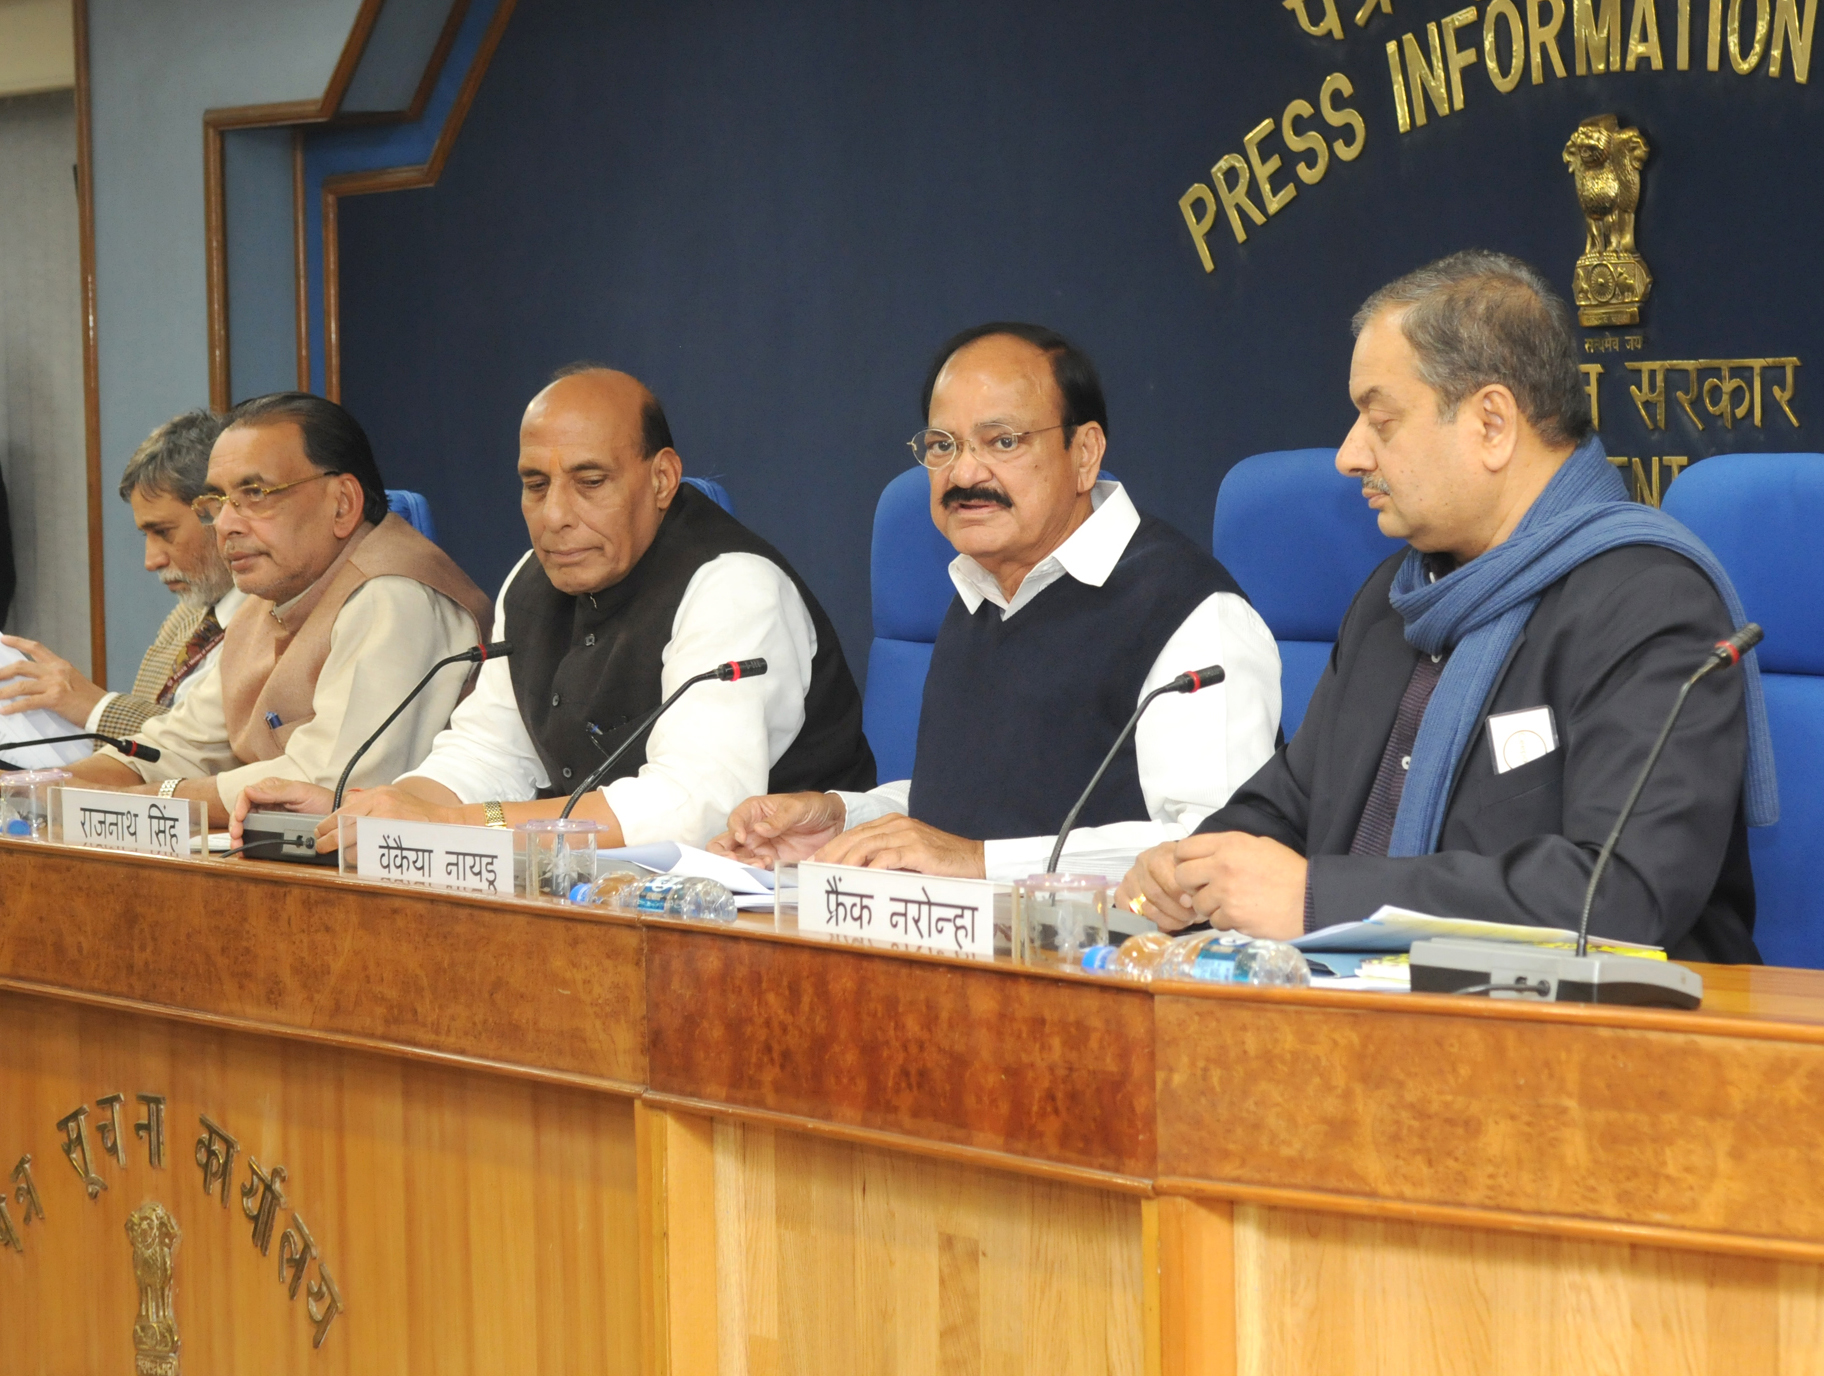 The Union Home Minister, Shri Rajnath Singh, the Union Minister for Urban Development, Housing and Urban Poverty Alleviation and Parliamentary Affairs, Shri M. Venkaiah Naidu and the Union Minister for Agriculture and Farmers Welfare, Shri Radha Mohan Singh briefing the media on Cabinet Decisions, in New Delhi on January 13, 2016. 	The Secretary, Department of Agriculture and Cooperation & Farmers Welfare, Shri Siraj Hussain and the Director General (M&C), Press Information Bureau, Shri A.P. Frank Noronha are also seen.